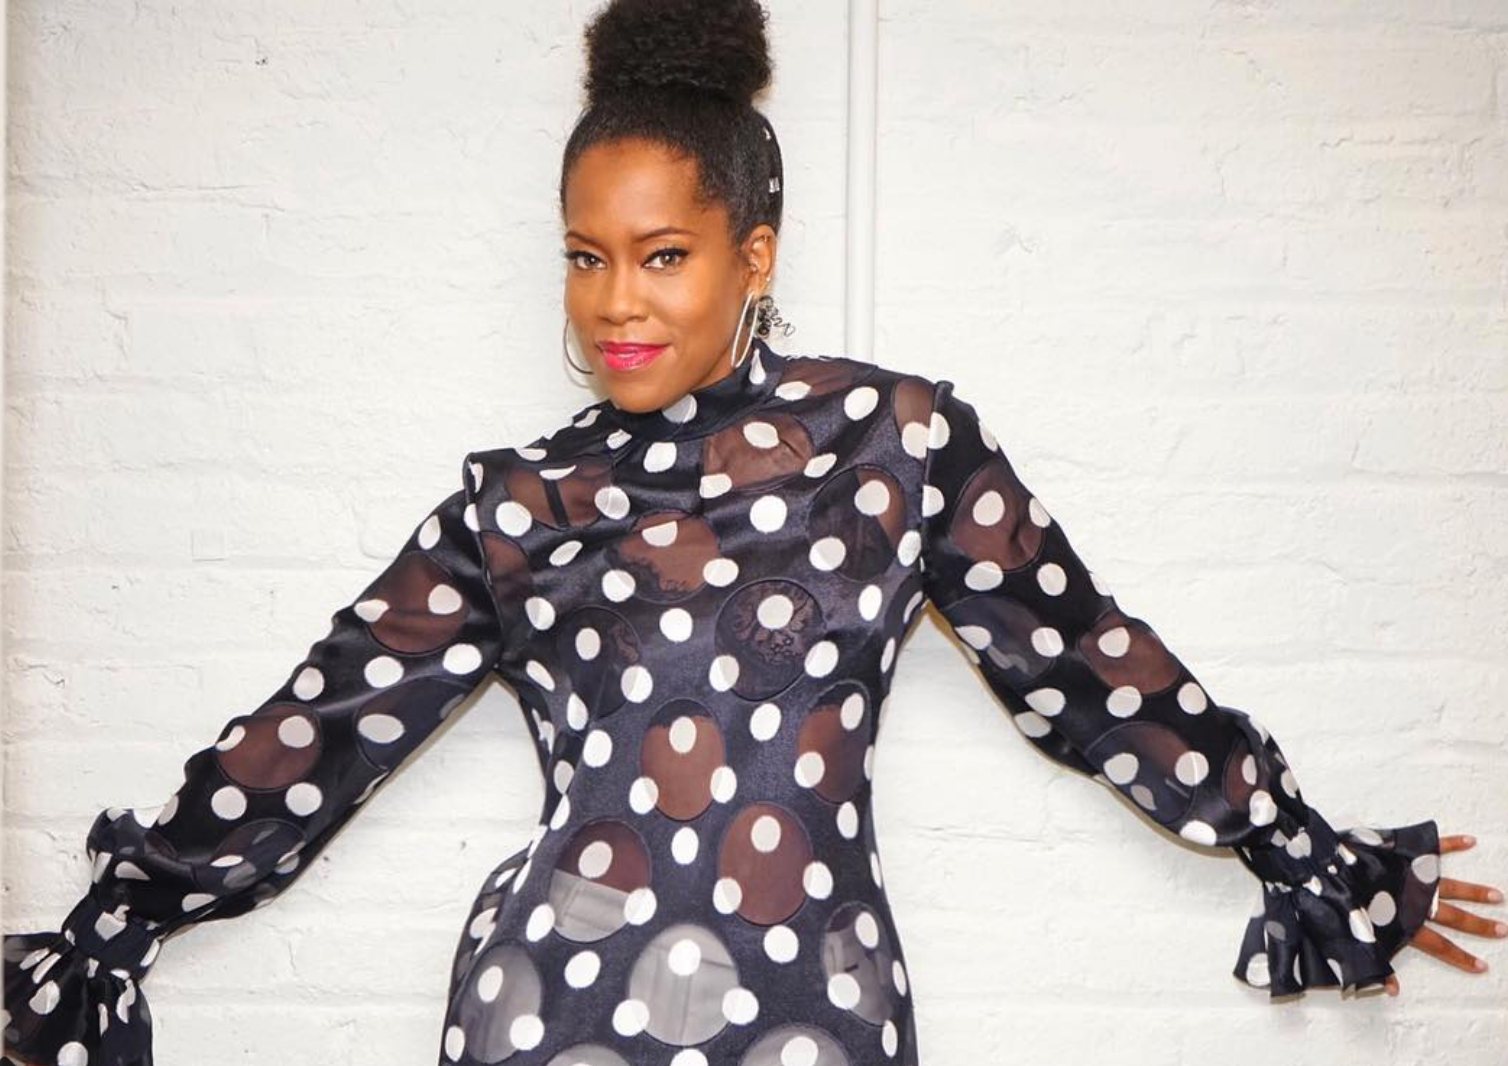 Redefining Family: Regina King On Getting Past The Pain With Her Ex-Husband and Putting Co-Parenting First
